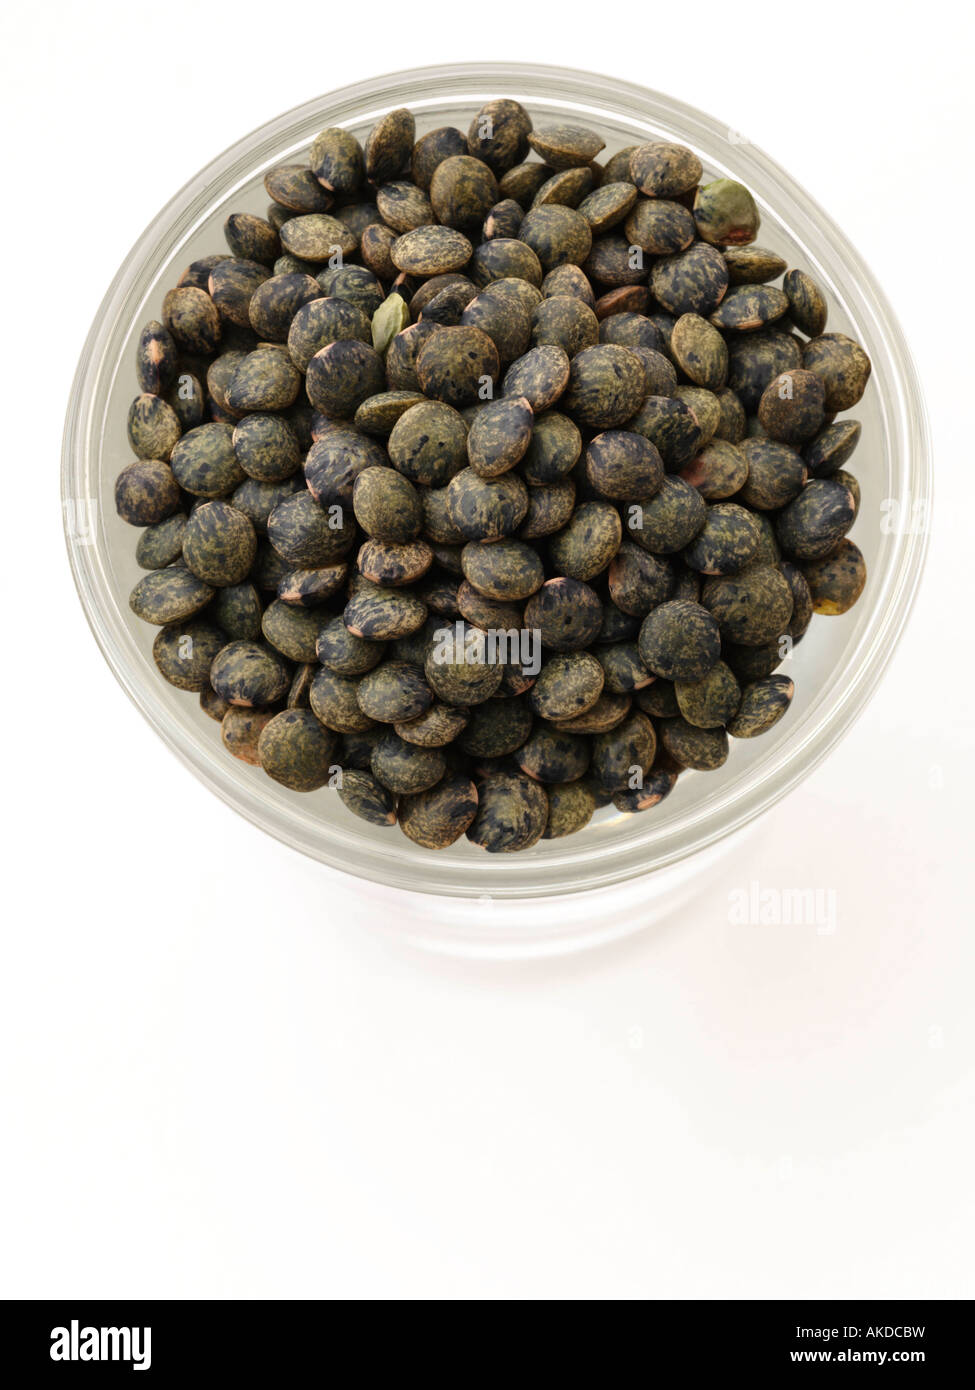 A glass of Le Puy lentils on a white background healthy vegetarian ingredients editorial food Stock Photo